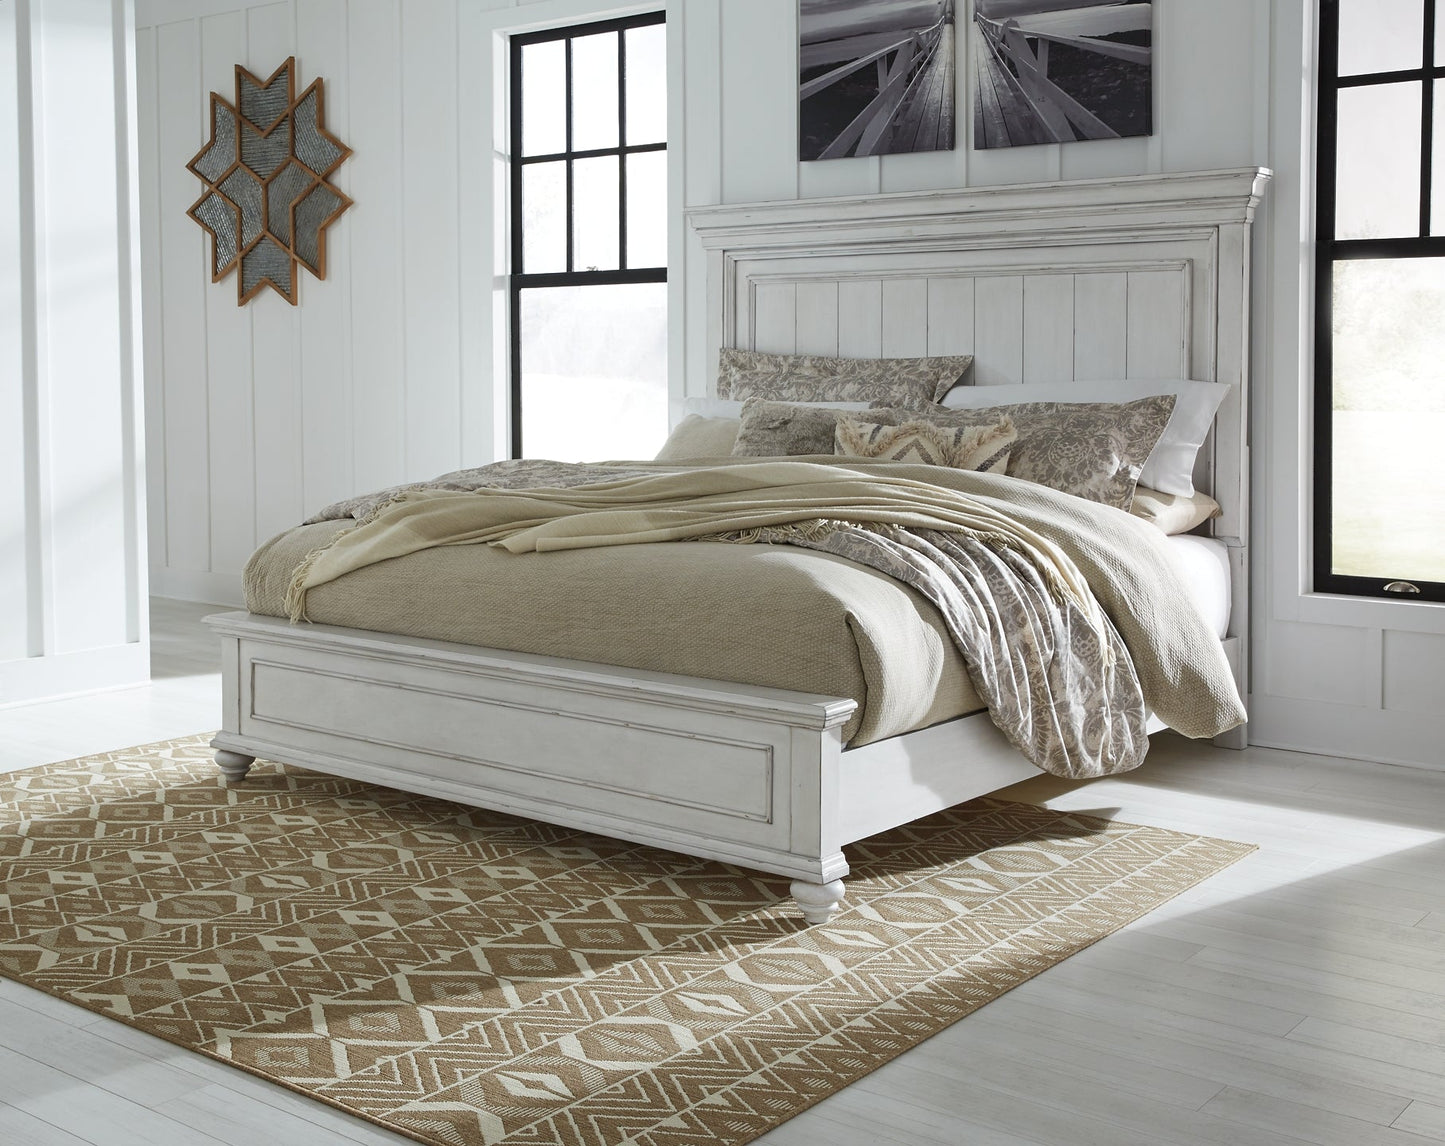 Kanwyn King Panel Bed with Dresser at Walker Mattress and Furniture Locations in Cedar Park and Belton TX.